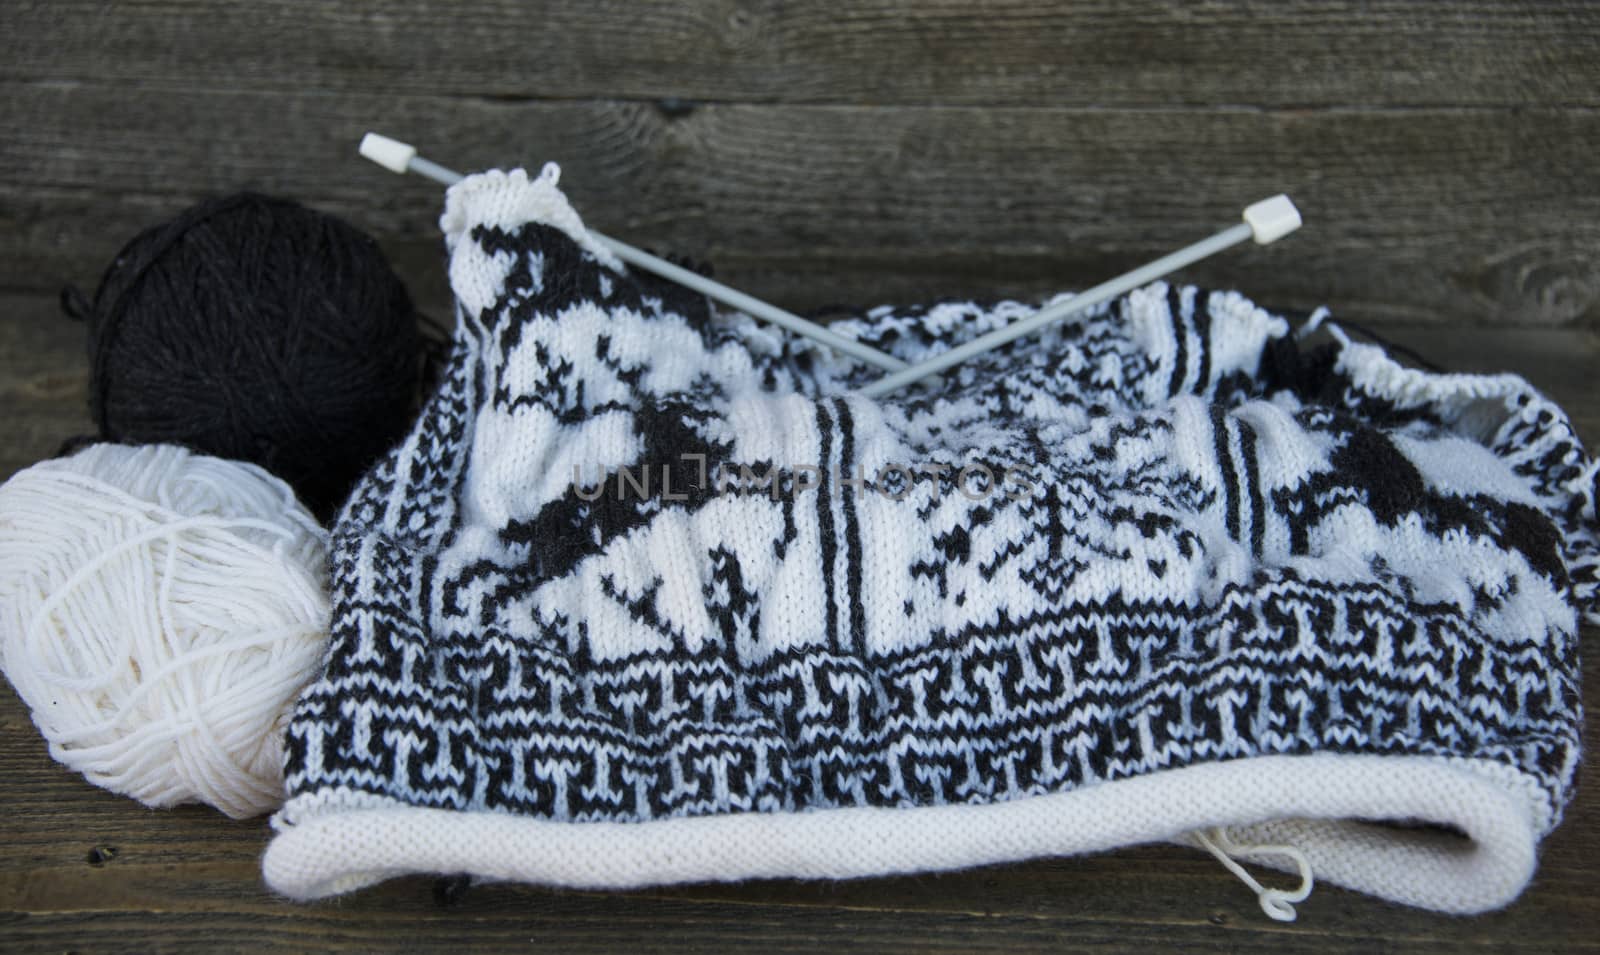 Knitting a traditional sweater with reindeer and snowflakes